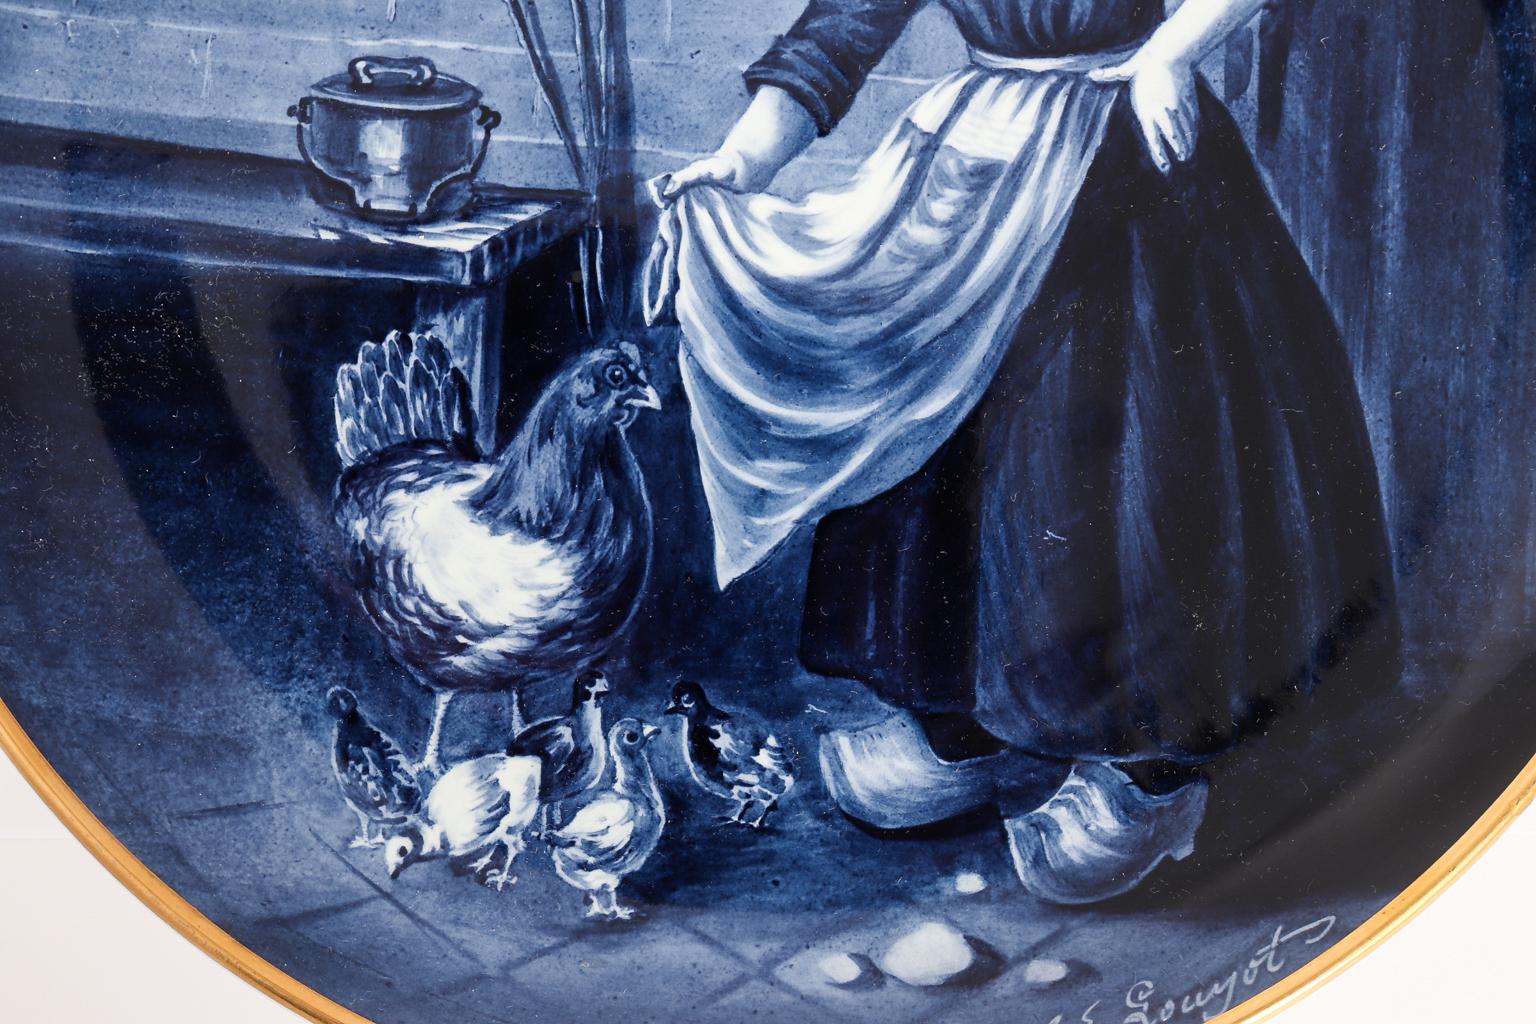 Villeroy & Boch Mettlach delft chargers. Artist signed. Matching #'s 5418-5420 circa 1900. Young girl with cats and young girl with chickens.
 